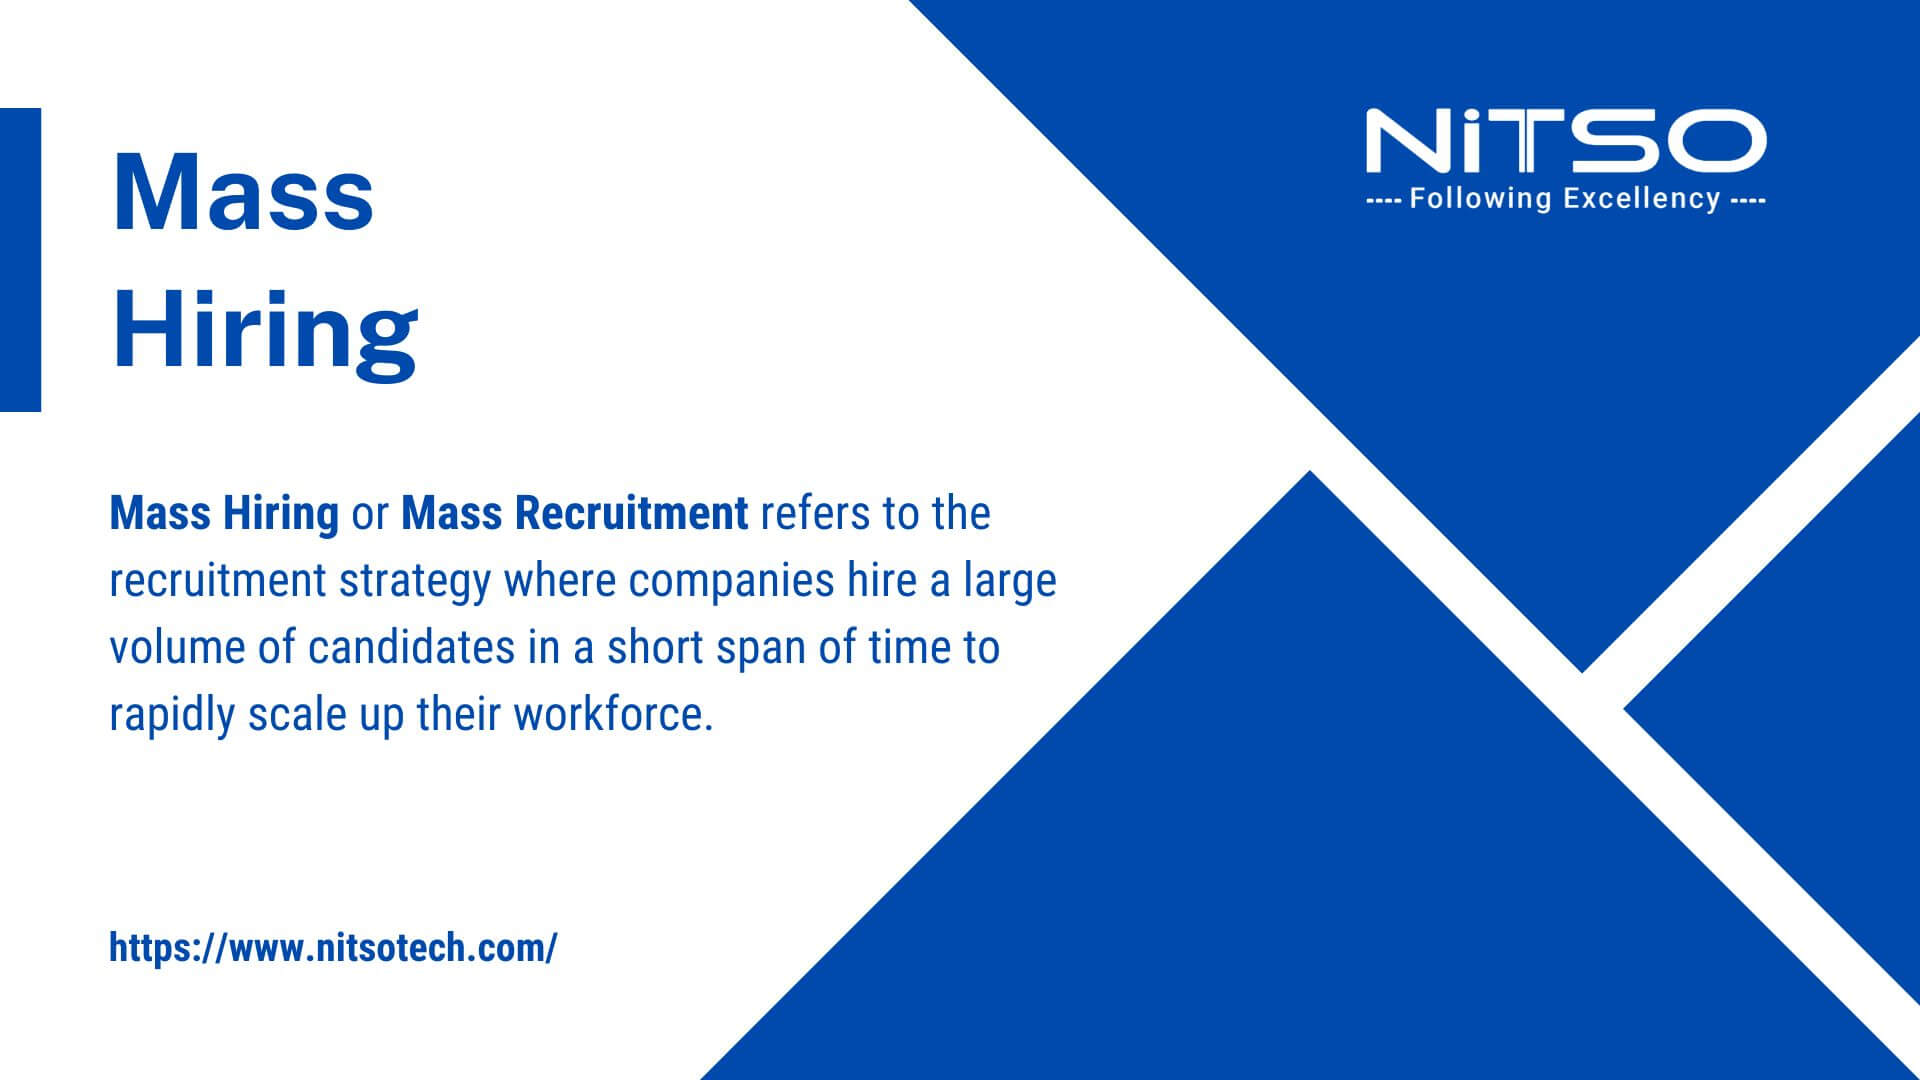 What is Mass Hiring?